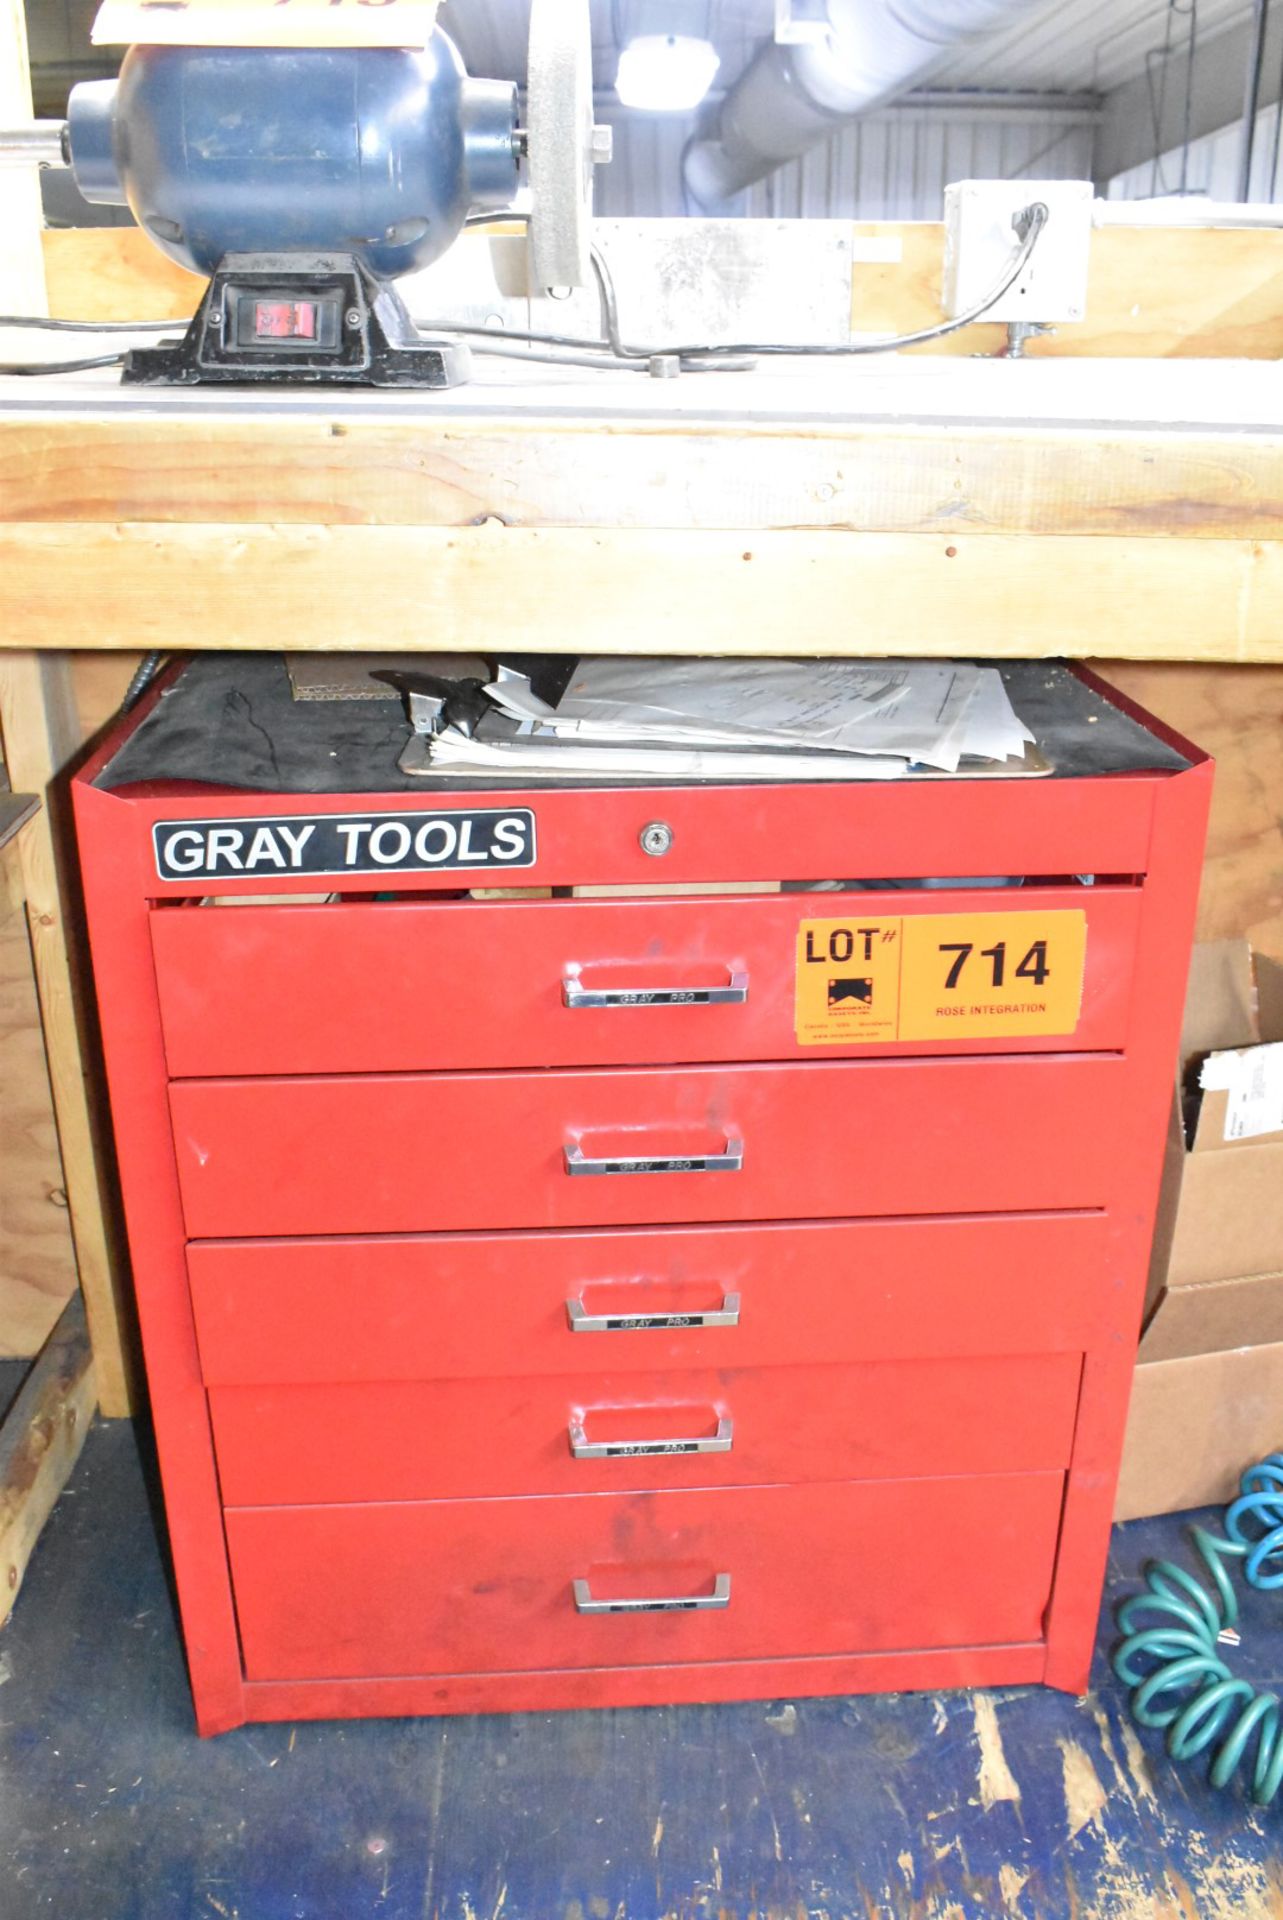 LOT/ GRAY TOOLS TOOLBOX WITH HAND TOOLS